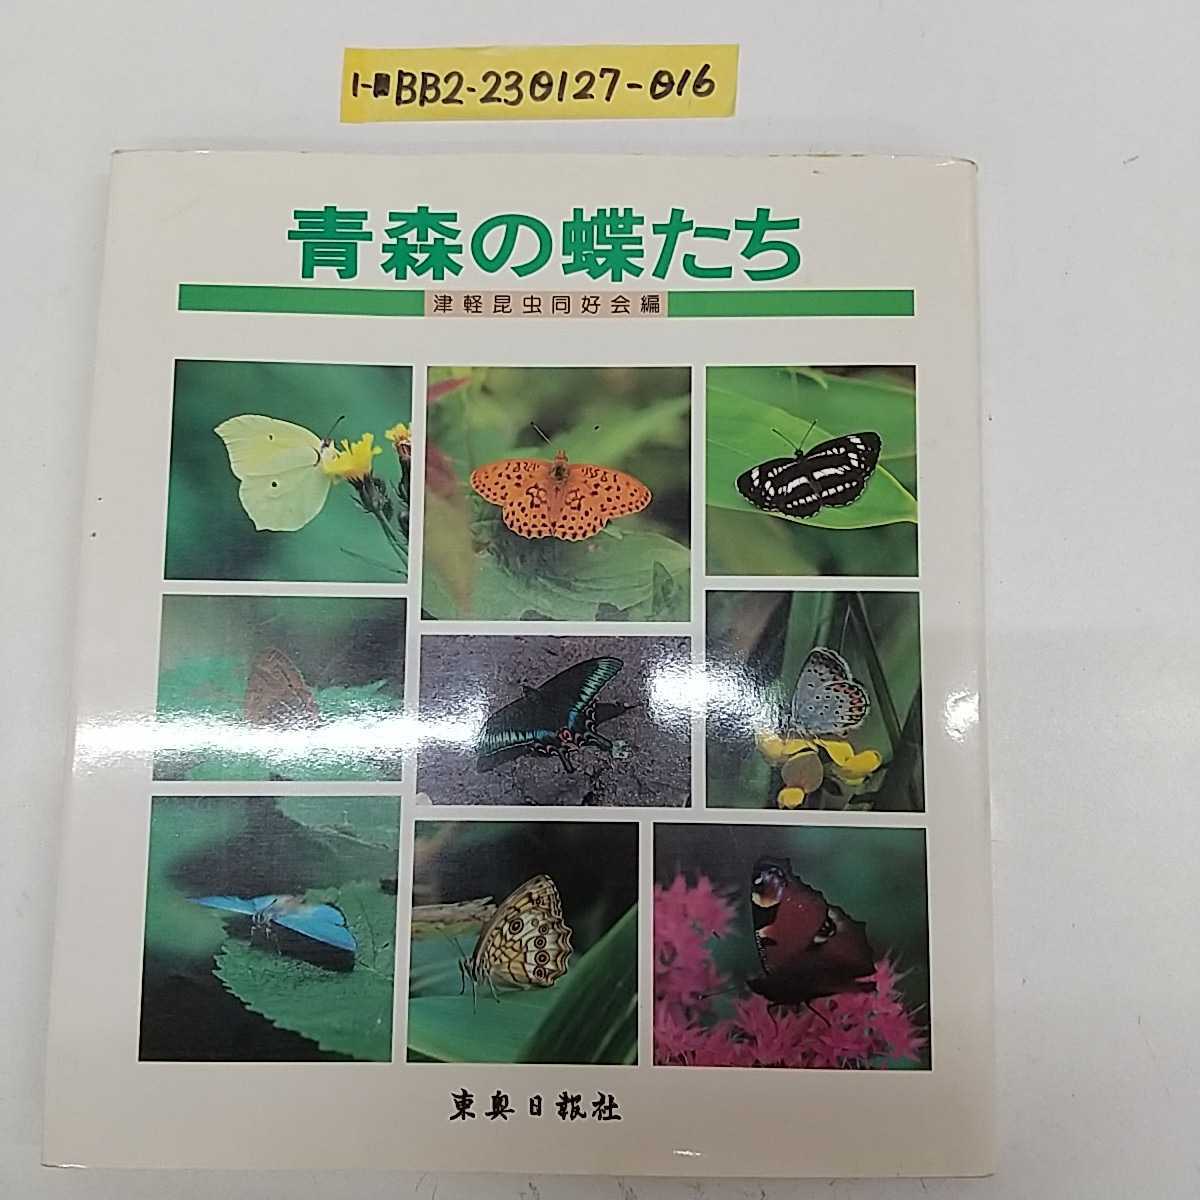 Insect Times Special 早大生物同好会昆虫班の会報蝶・甲虫・トンボ